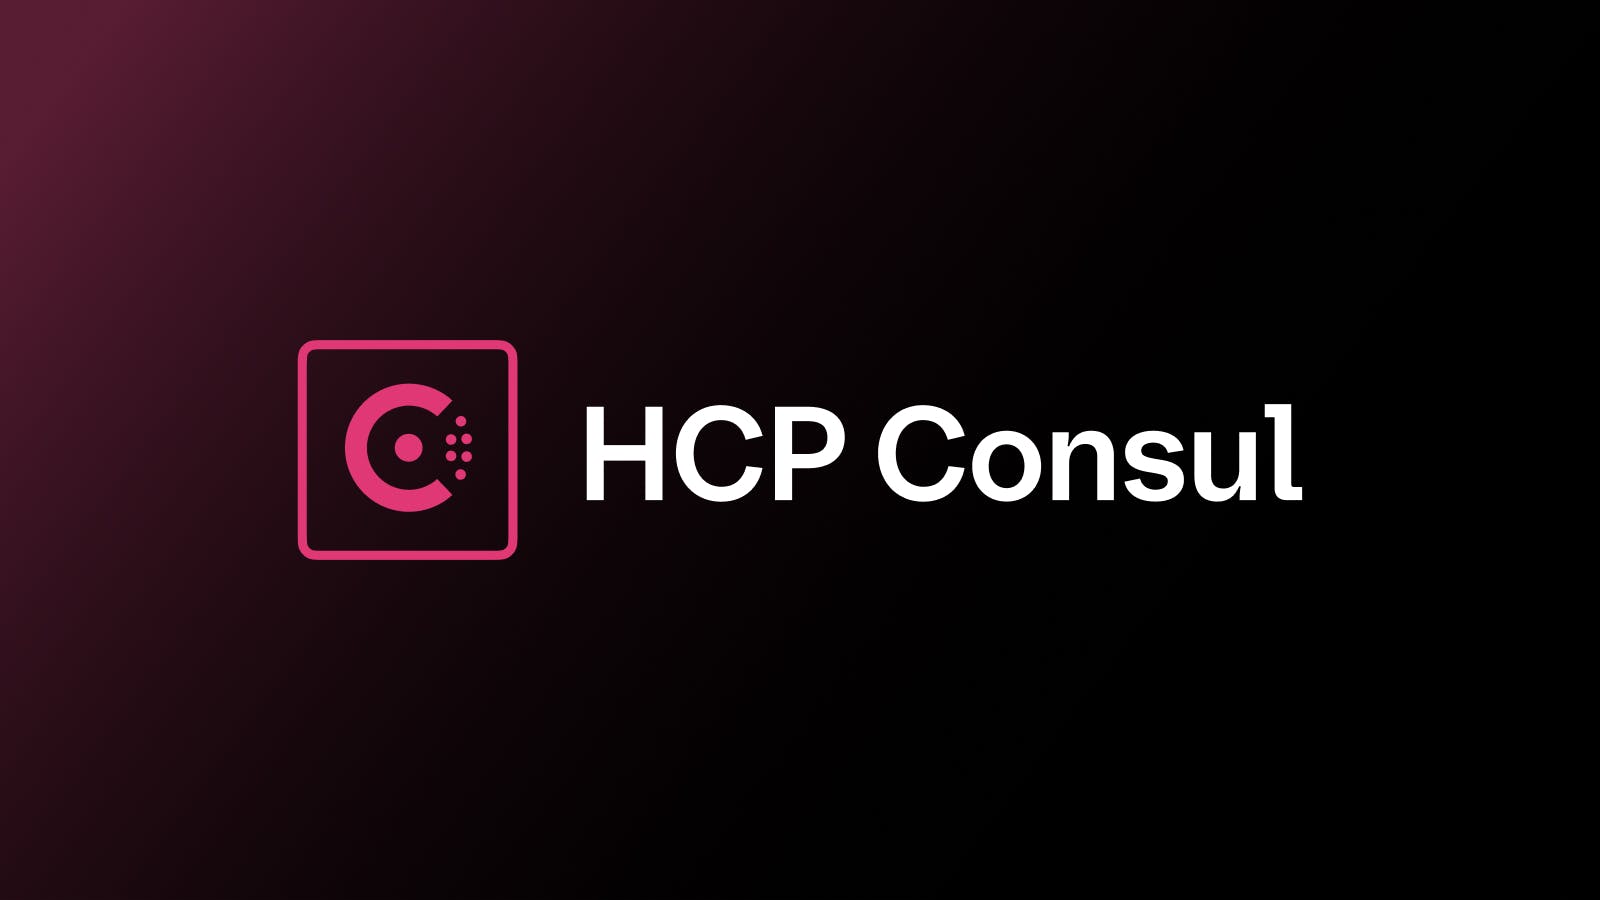 Gain operator confidence with HCP Consul Central observability features